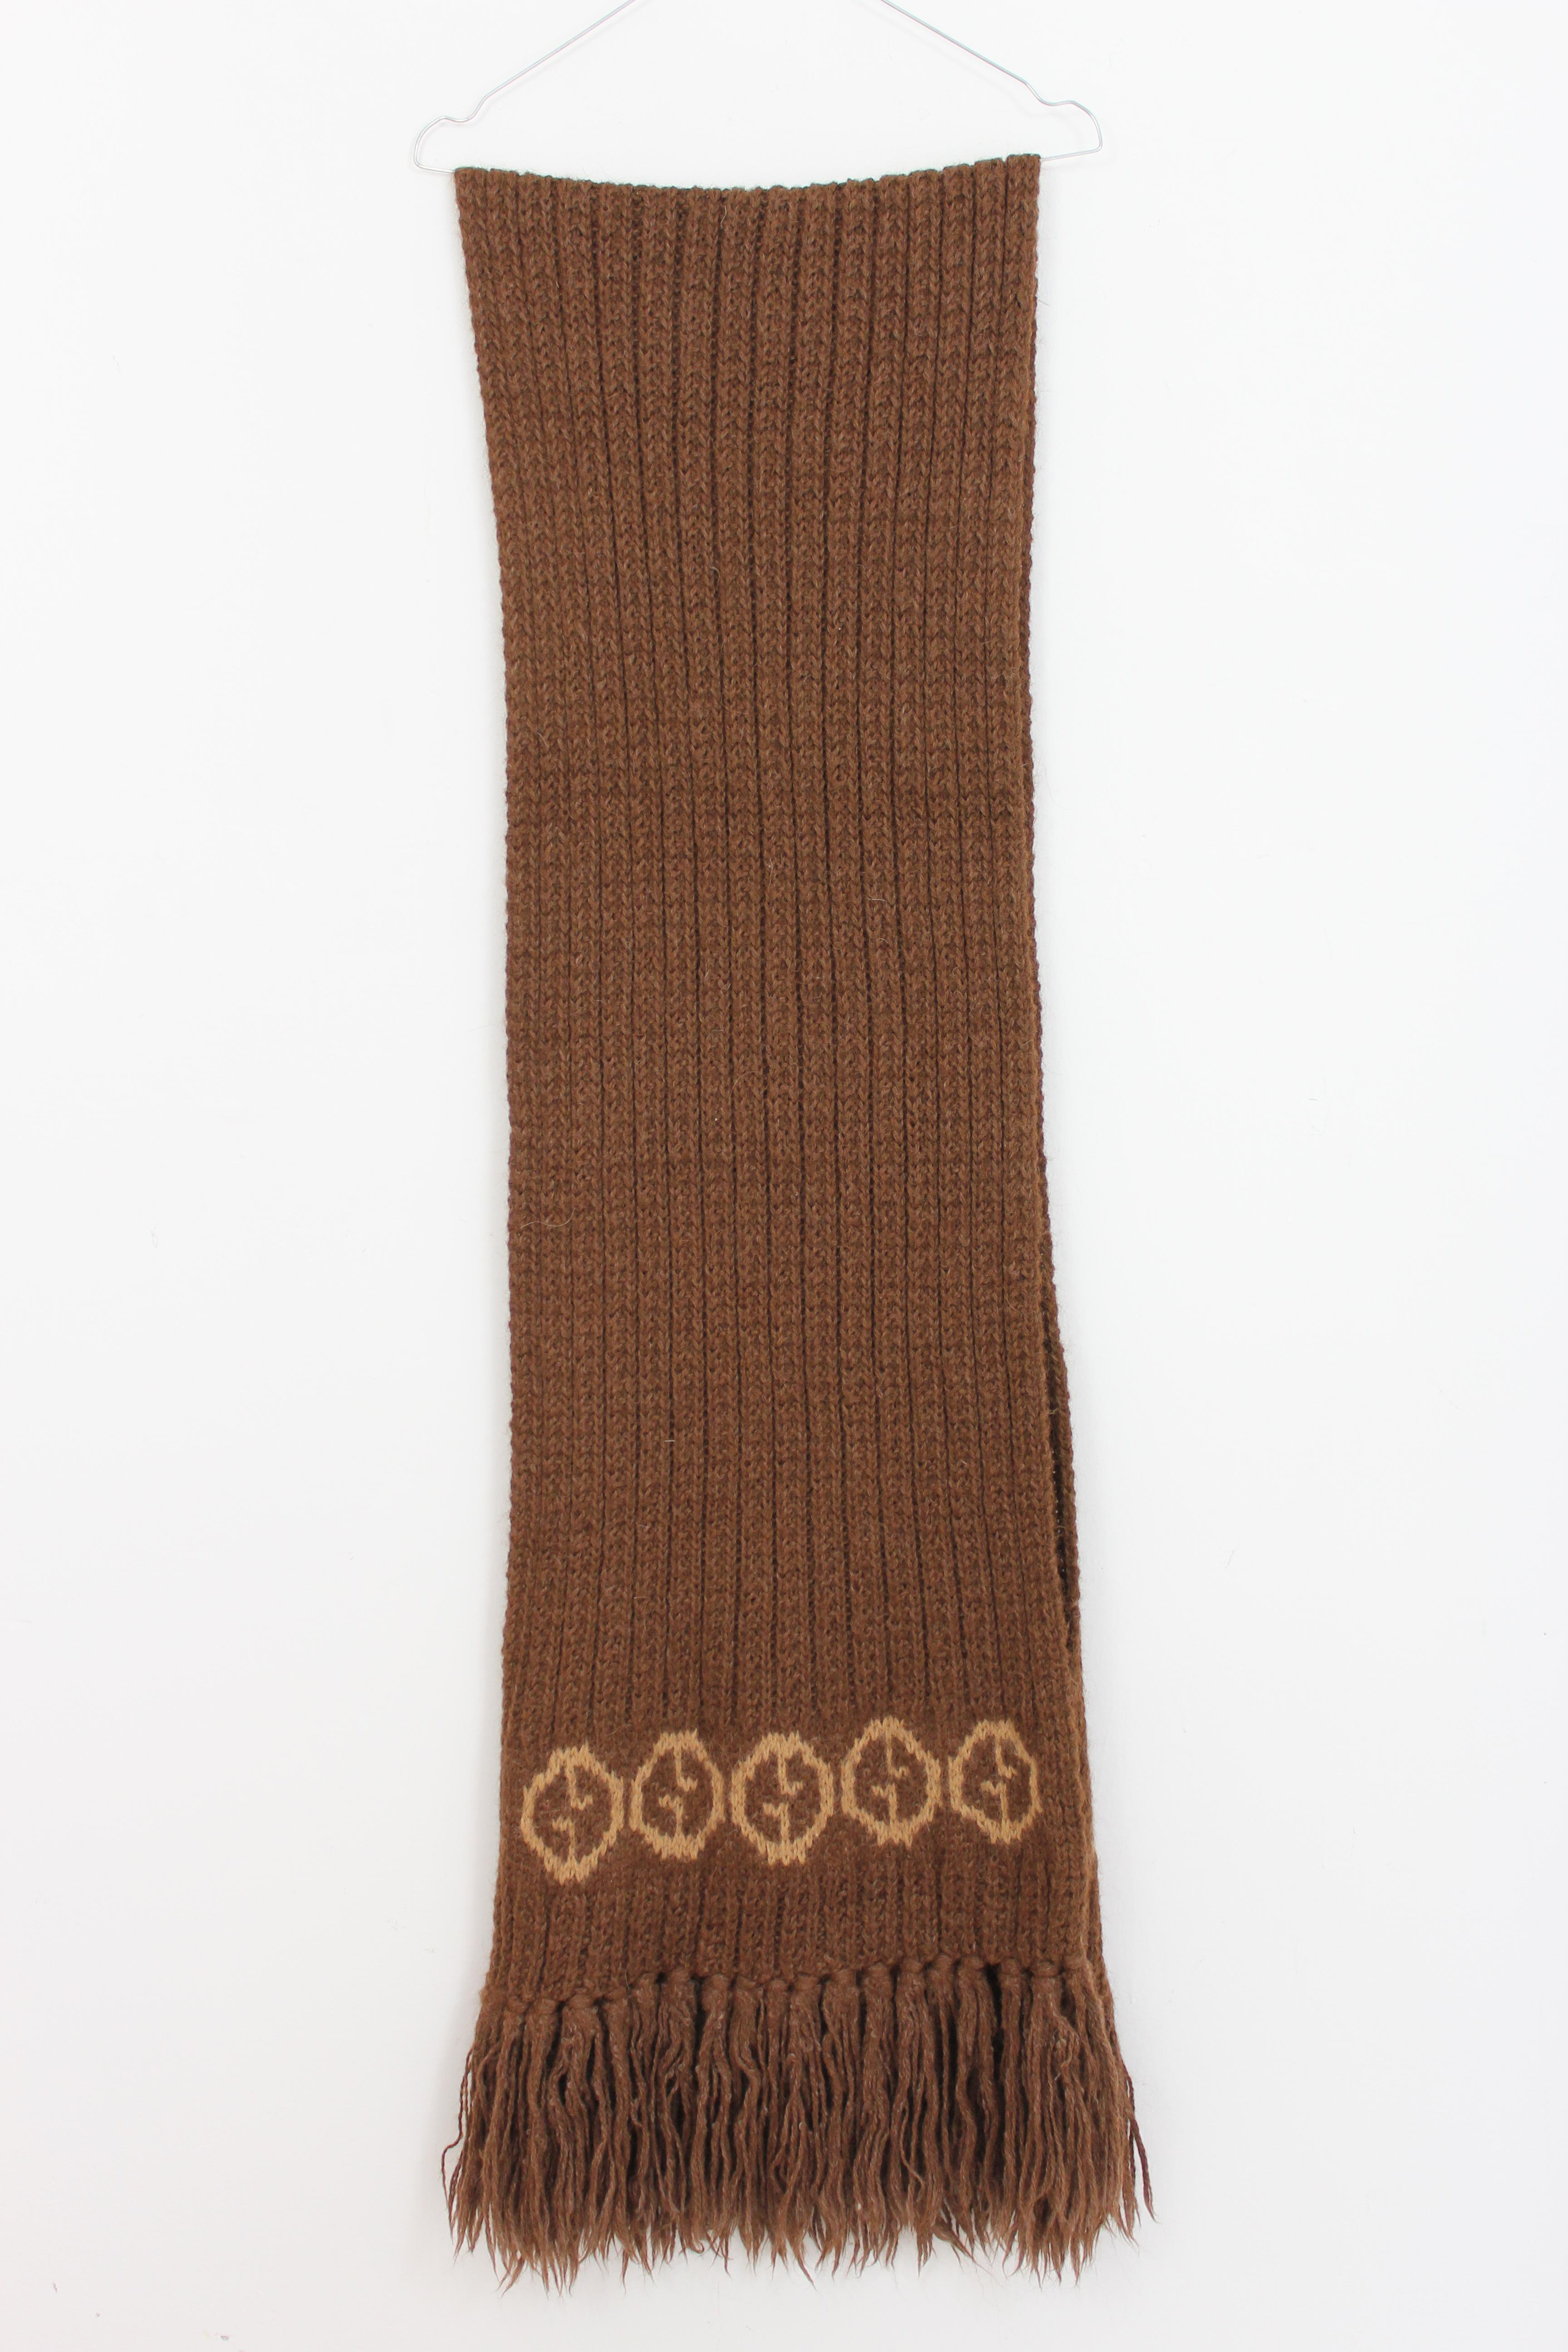 Gucci vintage 70s woman scarf. Large wrap scarf, brown with beige logo. 92% alpaca 8% acrylic fabric. Made in Italy.

Condition: Excellent

Item used few times, it remains in its excellent condition. There are no visible signs of wear, and it is